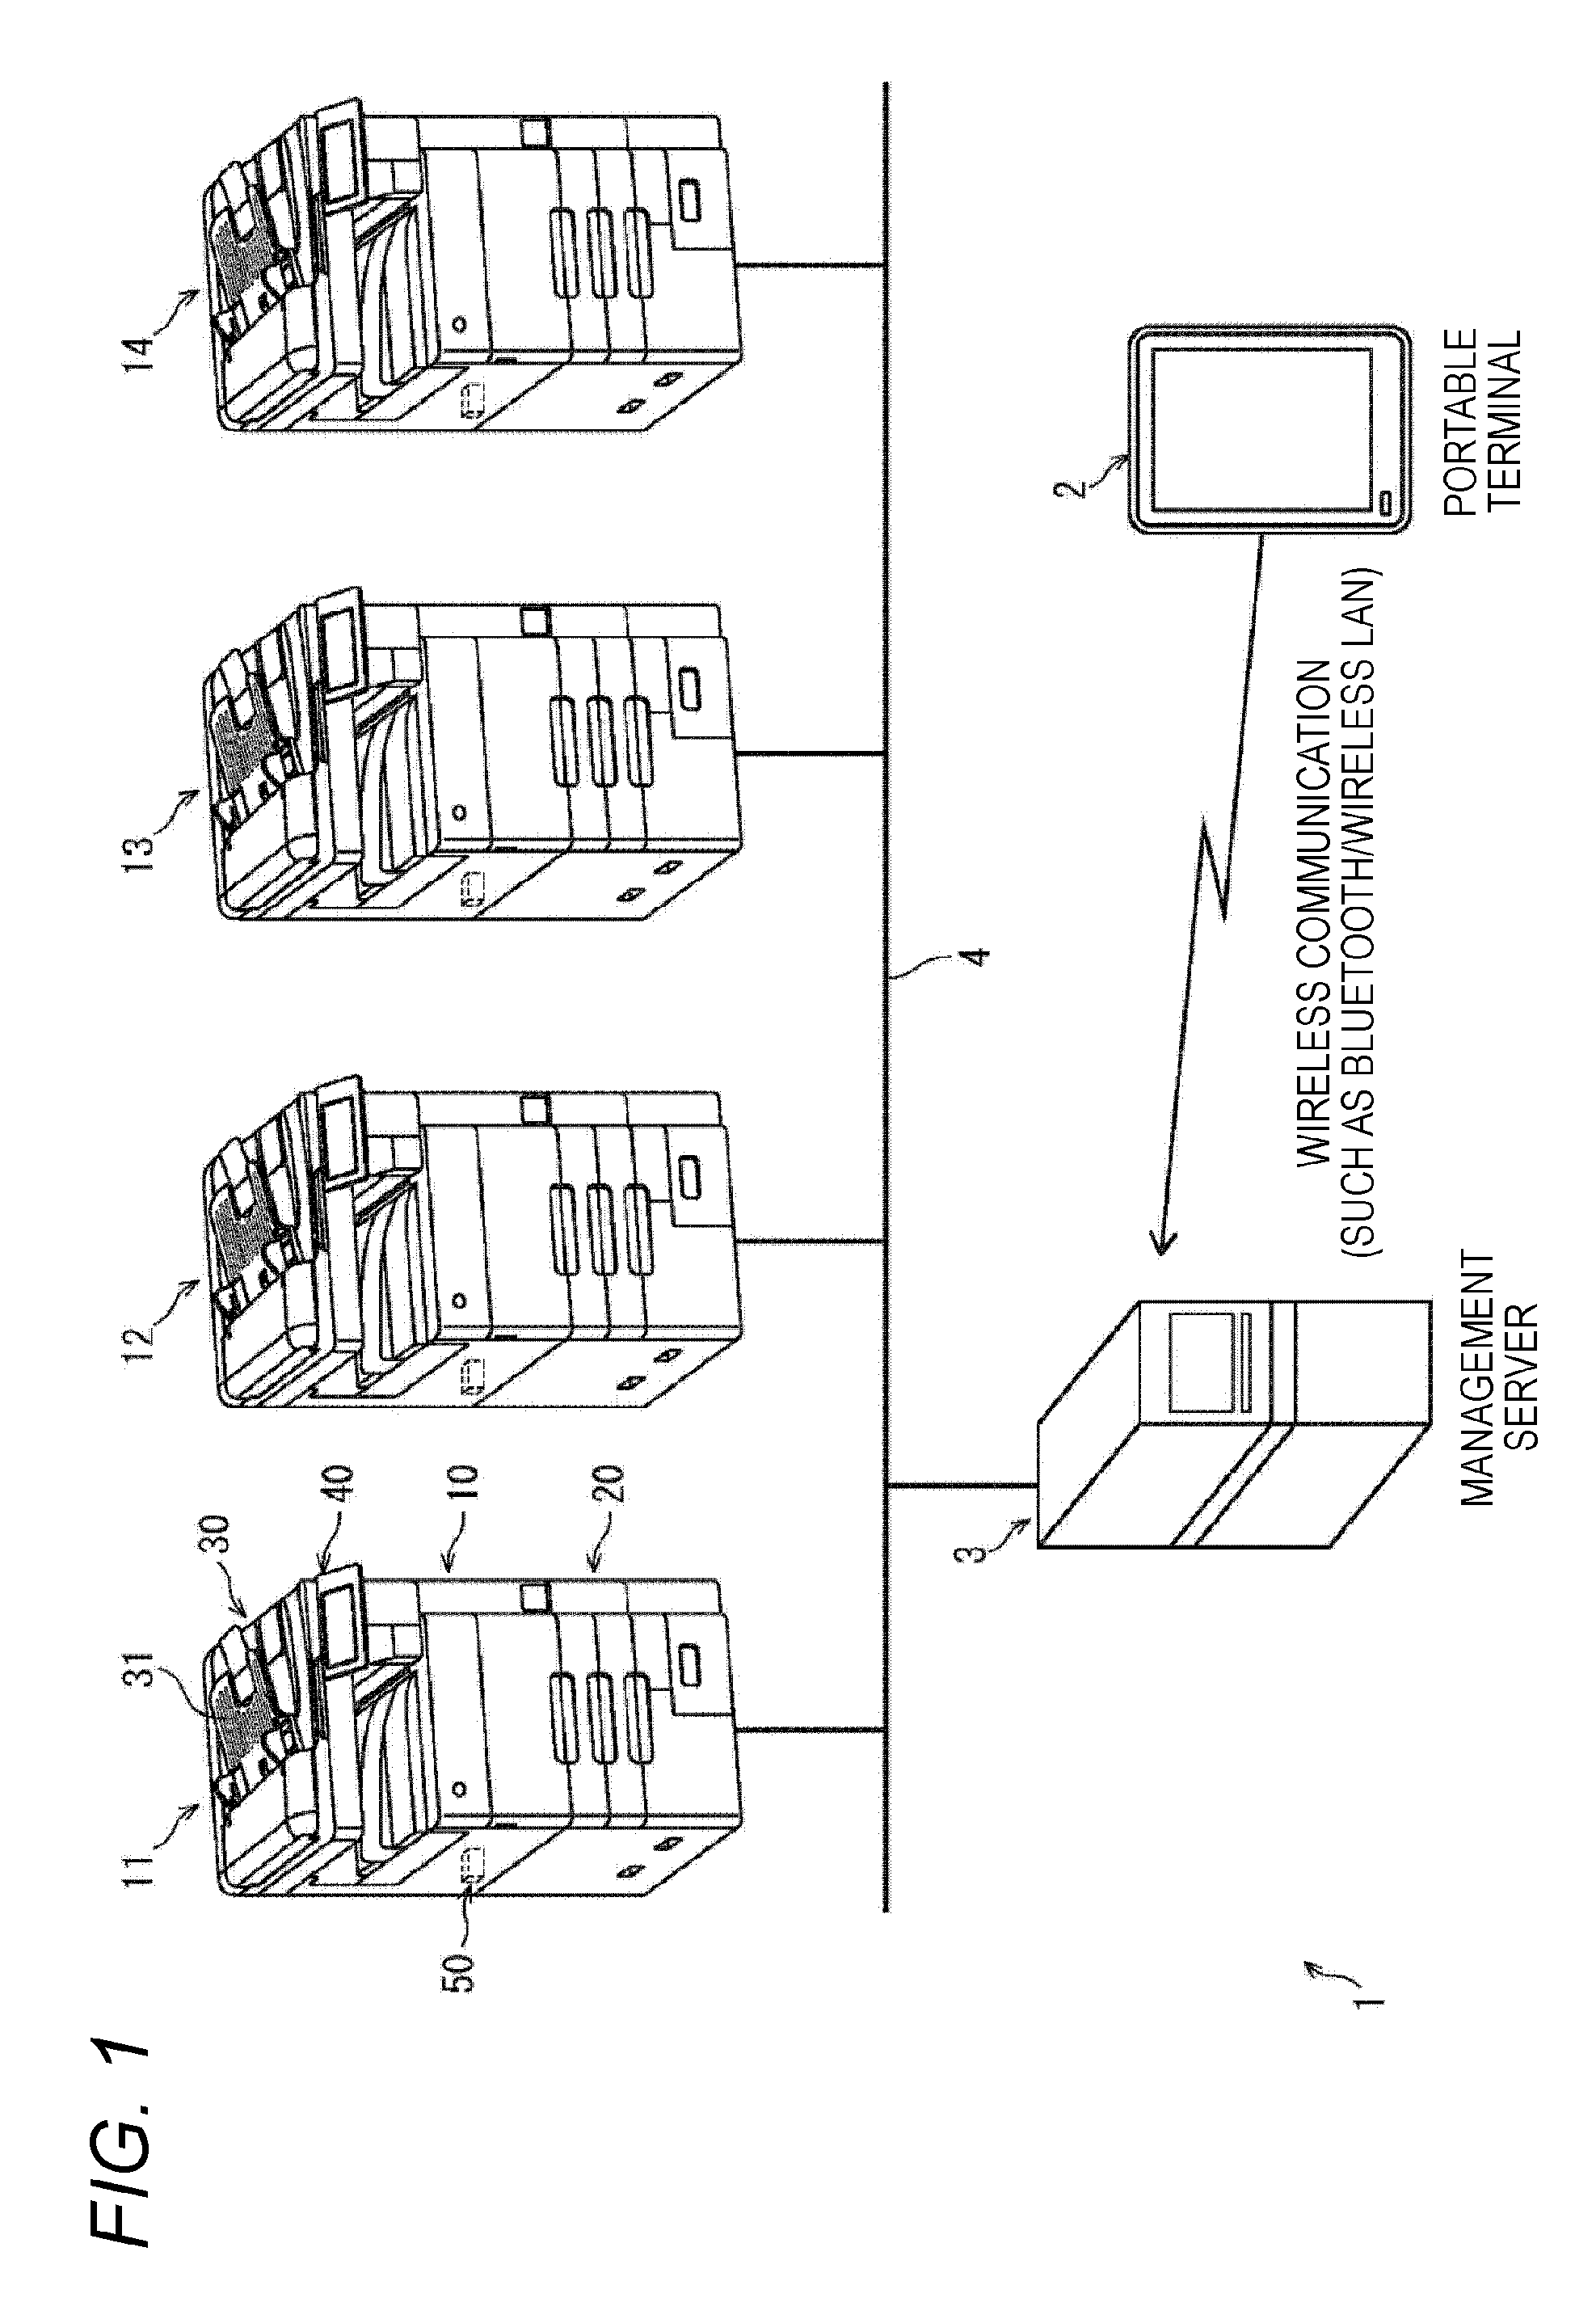 Image processing system, image processing apparatus, and portable information terminal